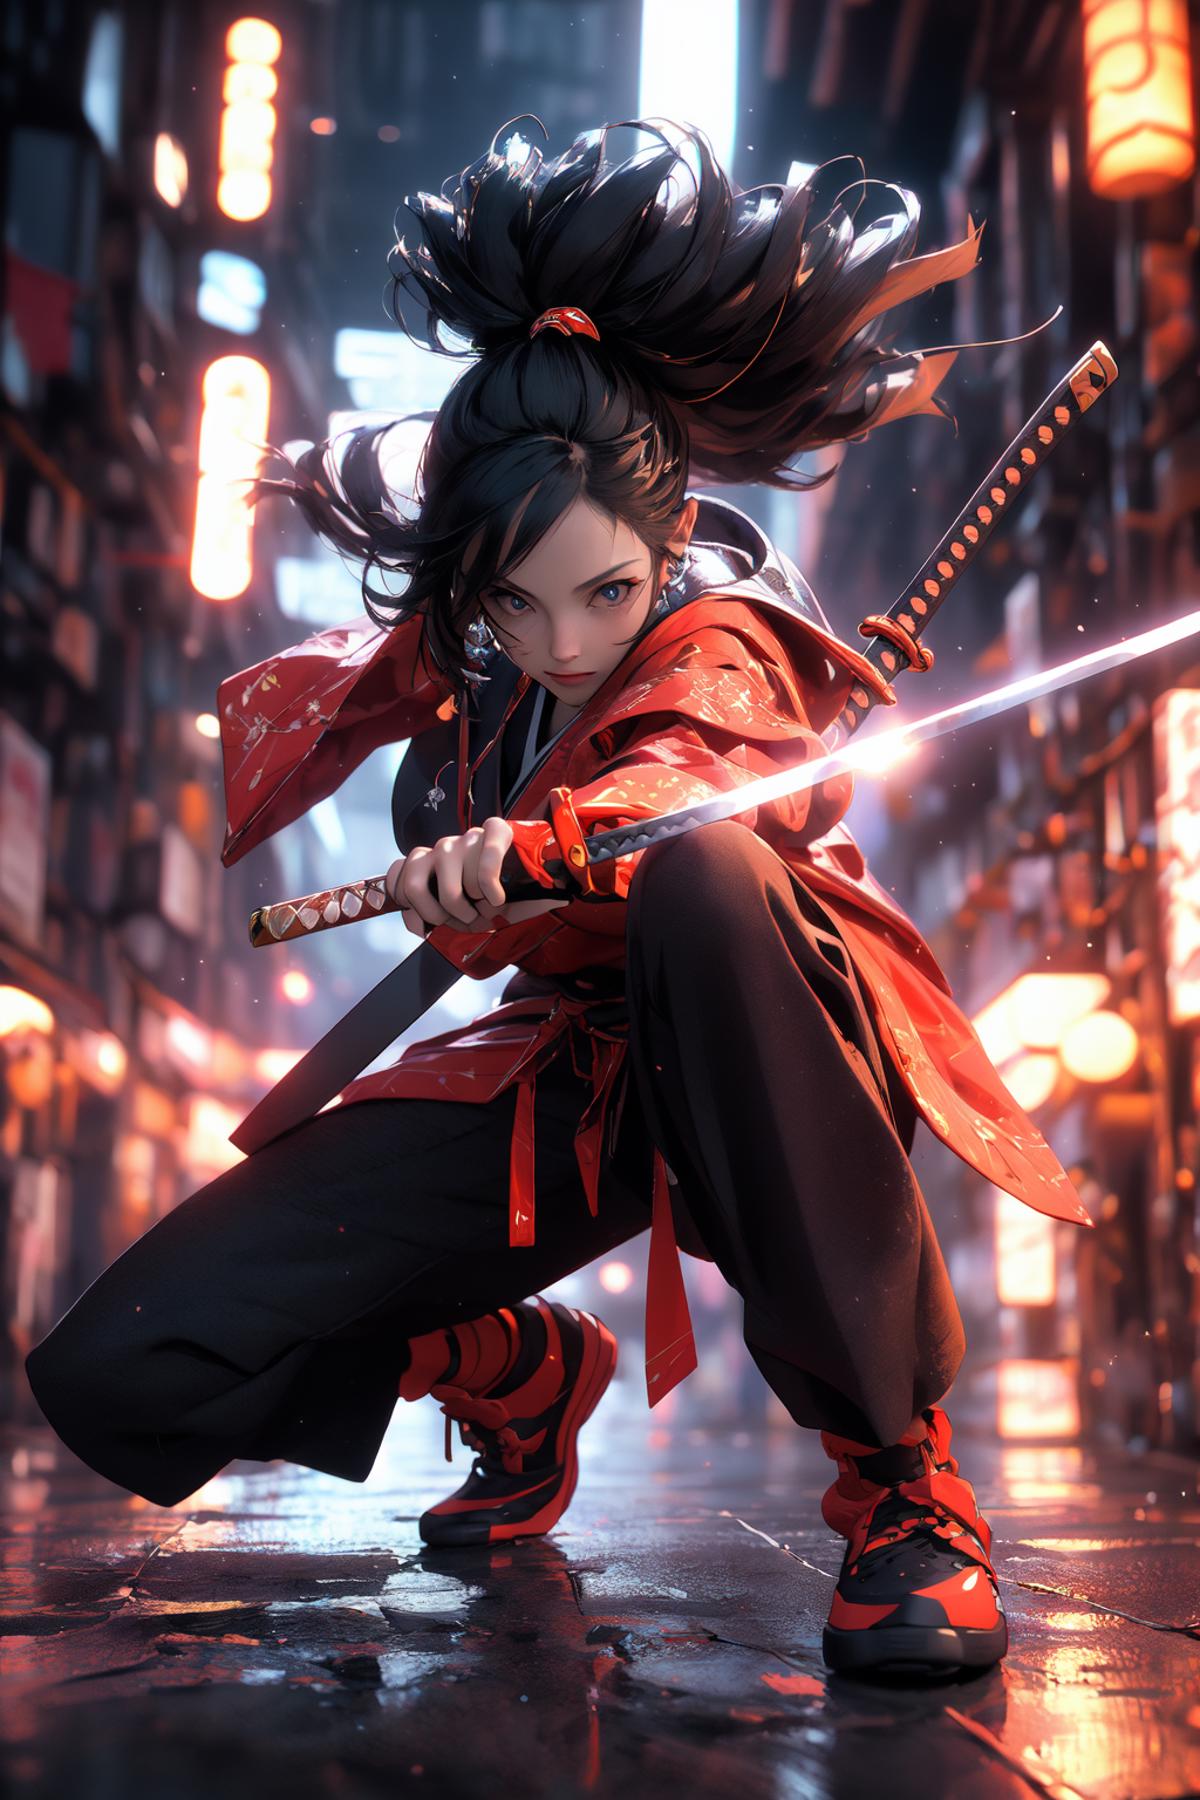 Anime-style character with a sword, ready to strike.